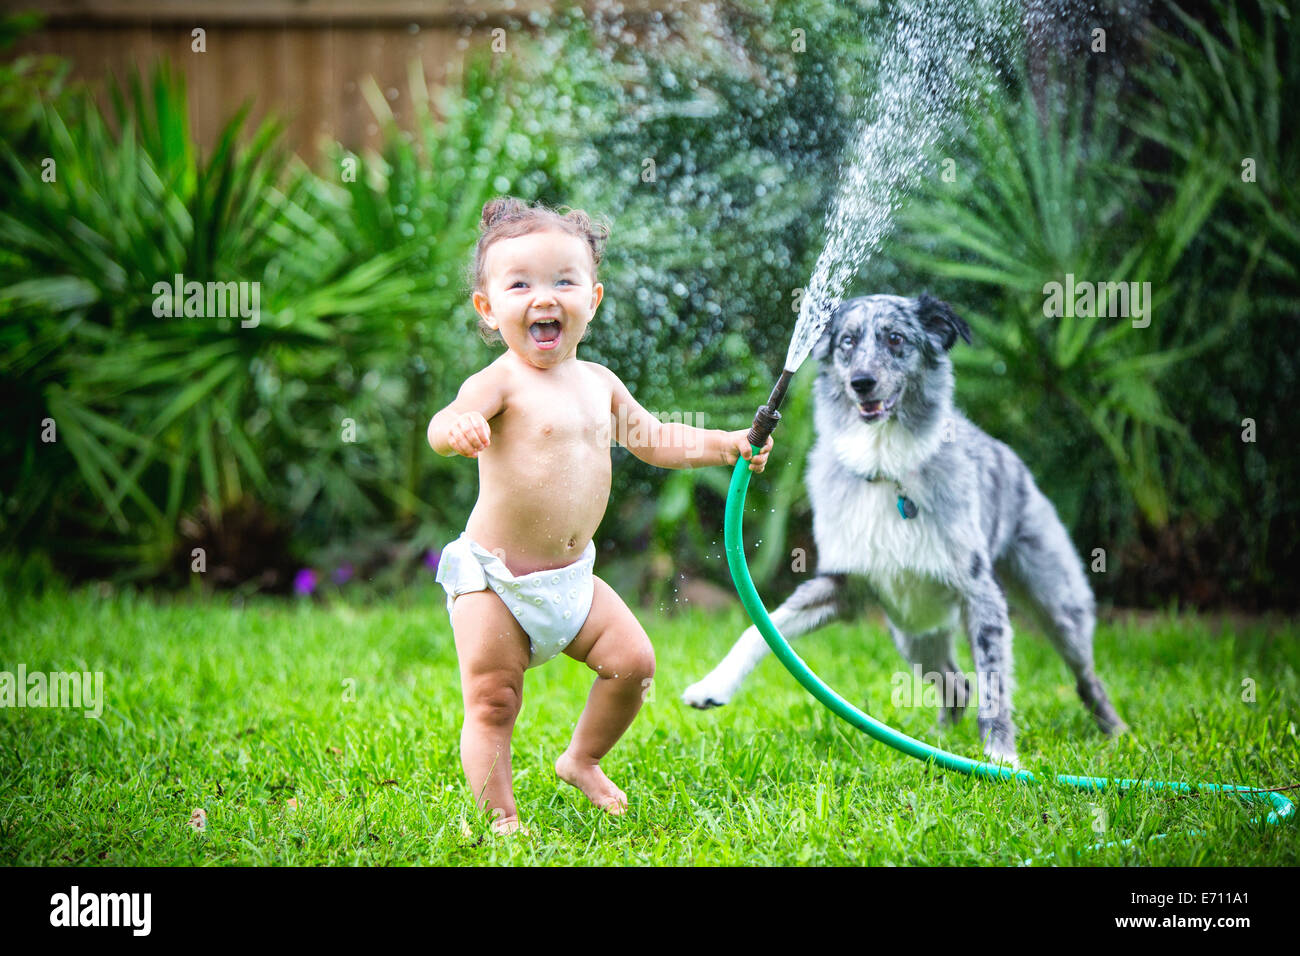 Toddler girl holding water hose, playing with dog Stock Photo